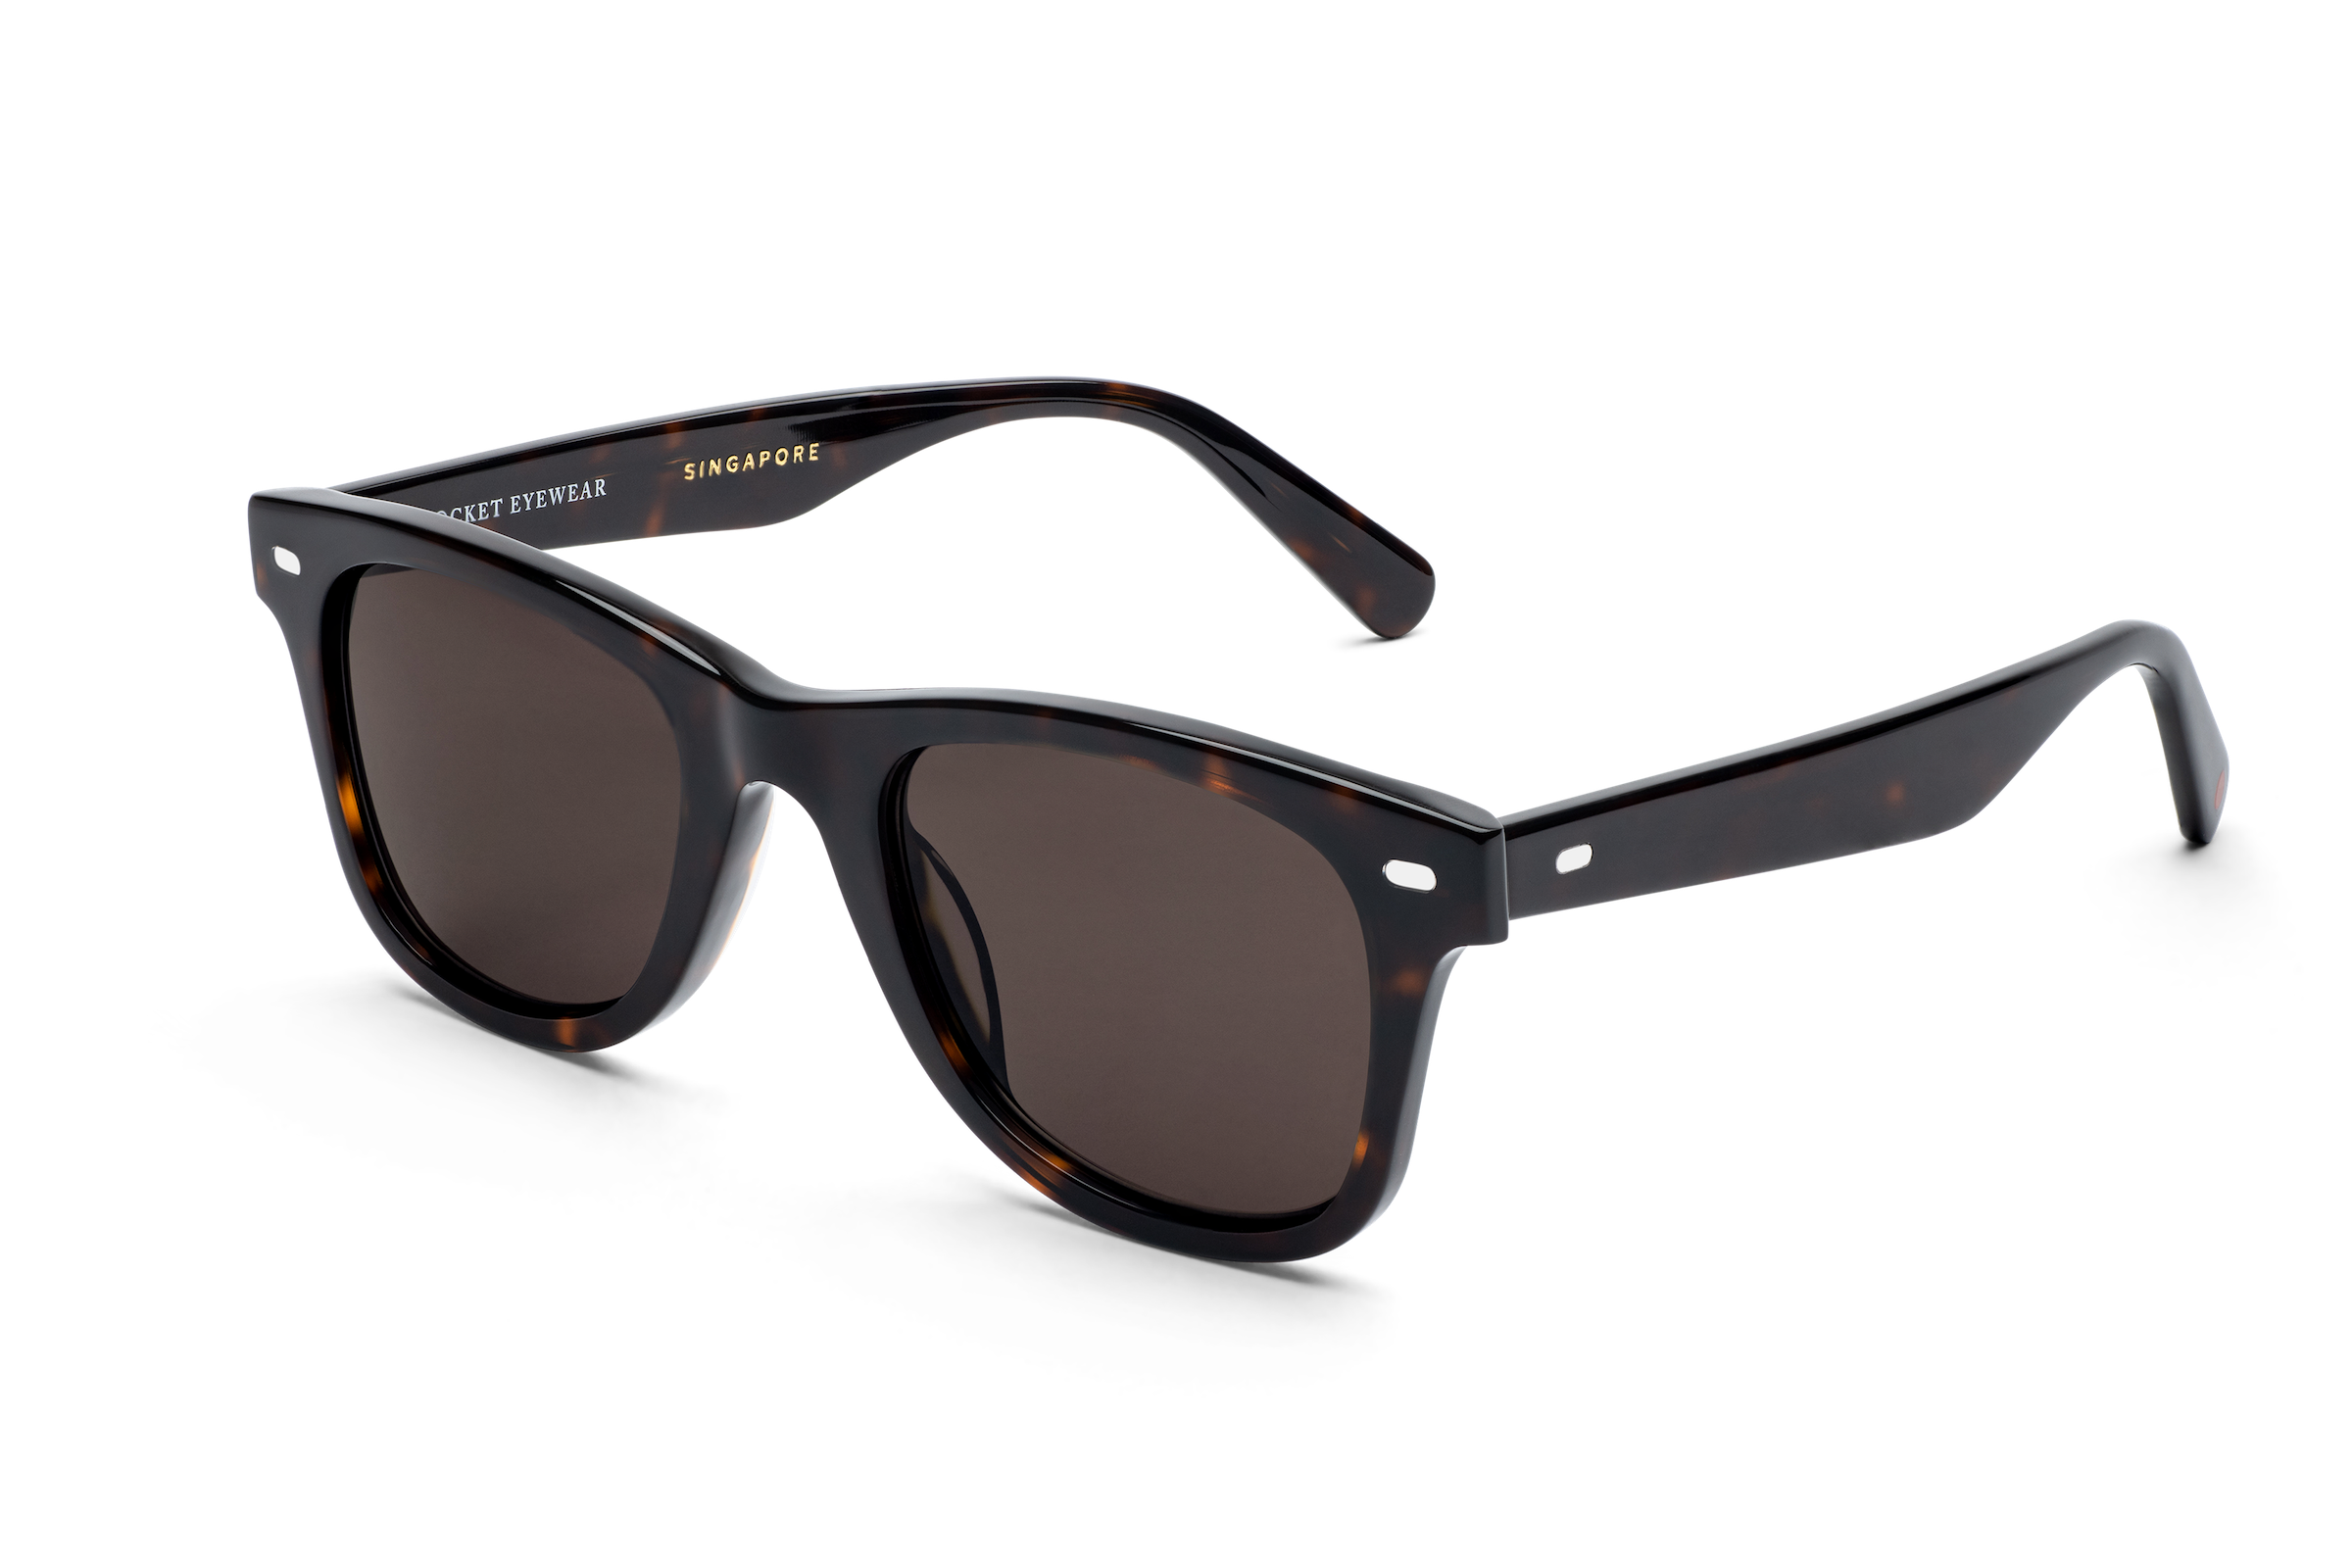 Rocket Eyewear SPT Classic Mahogany Tortoise with Brown Polarized Lenses (Limited Edition)